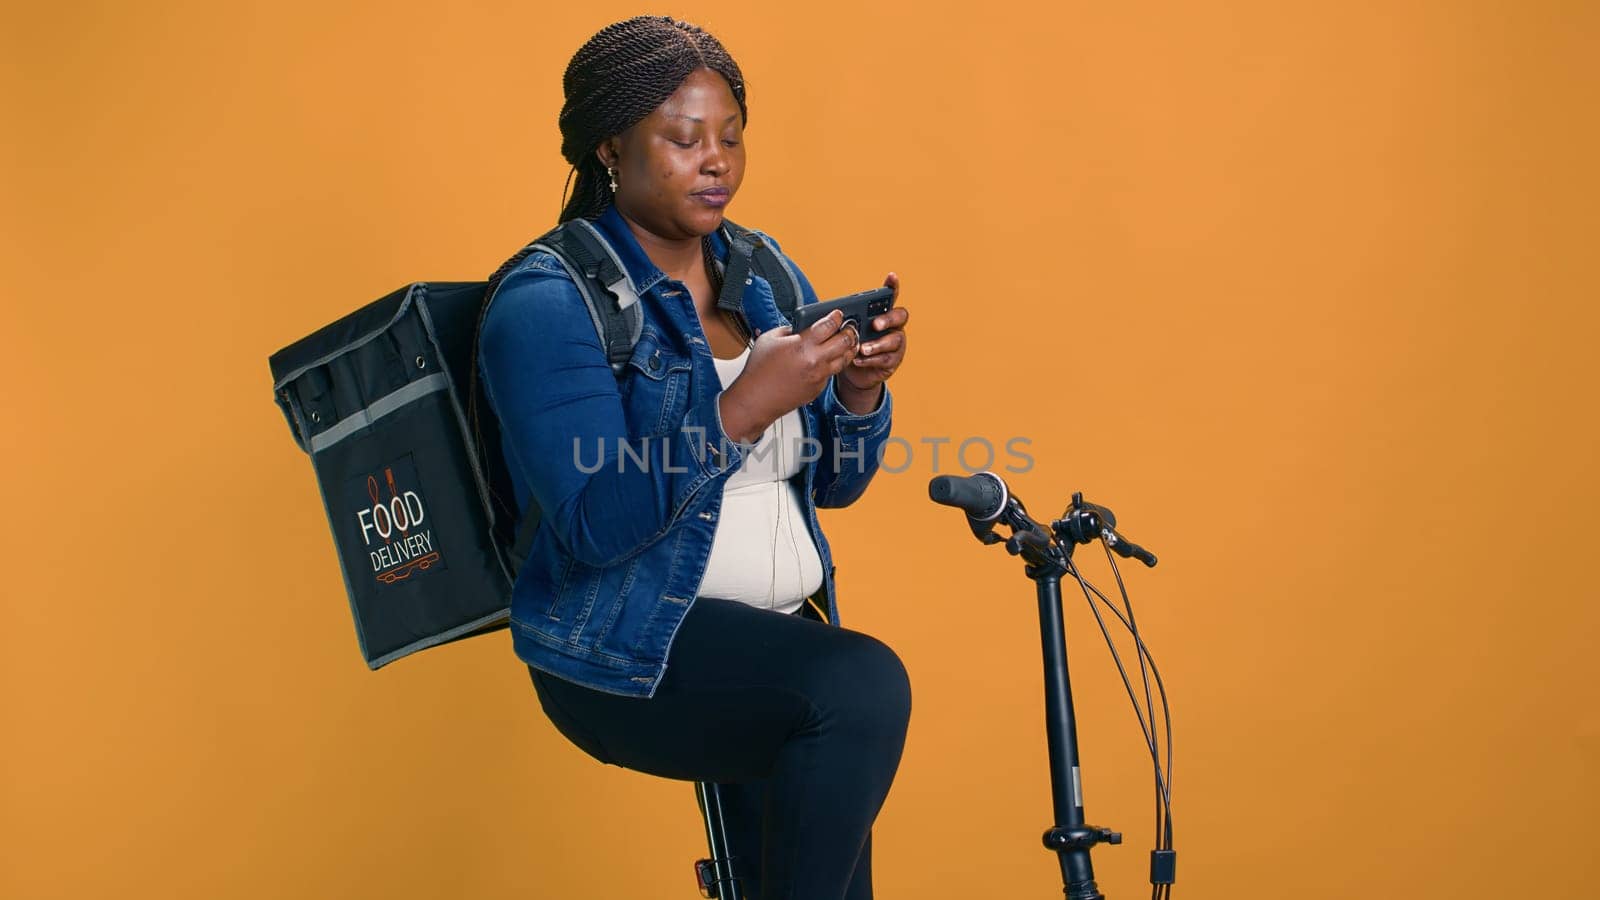 Professional african american cyclist uses bicycle and smartphone to offer efficient food delivery service. Young black woman embraces fast-paced economy of utlizing mobile device for courier job.